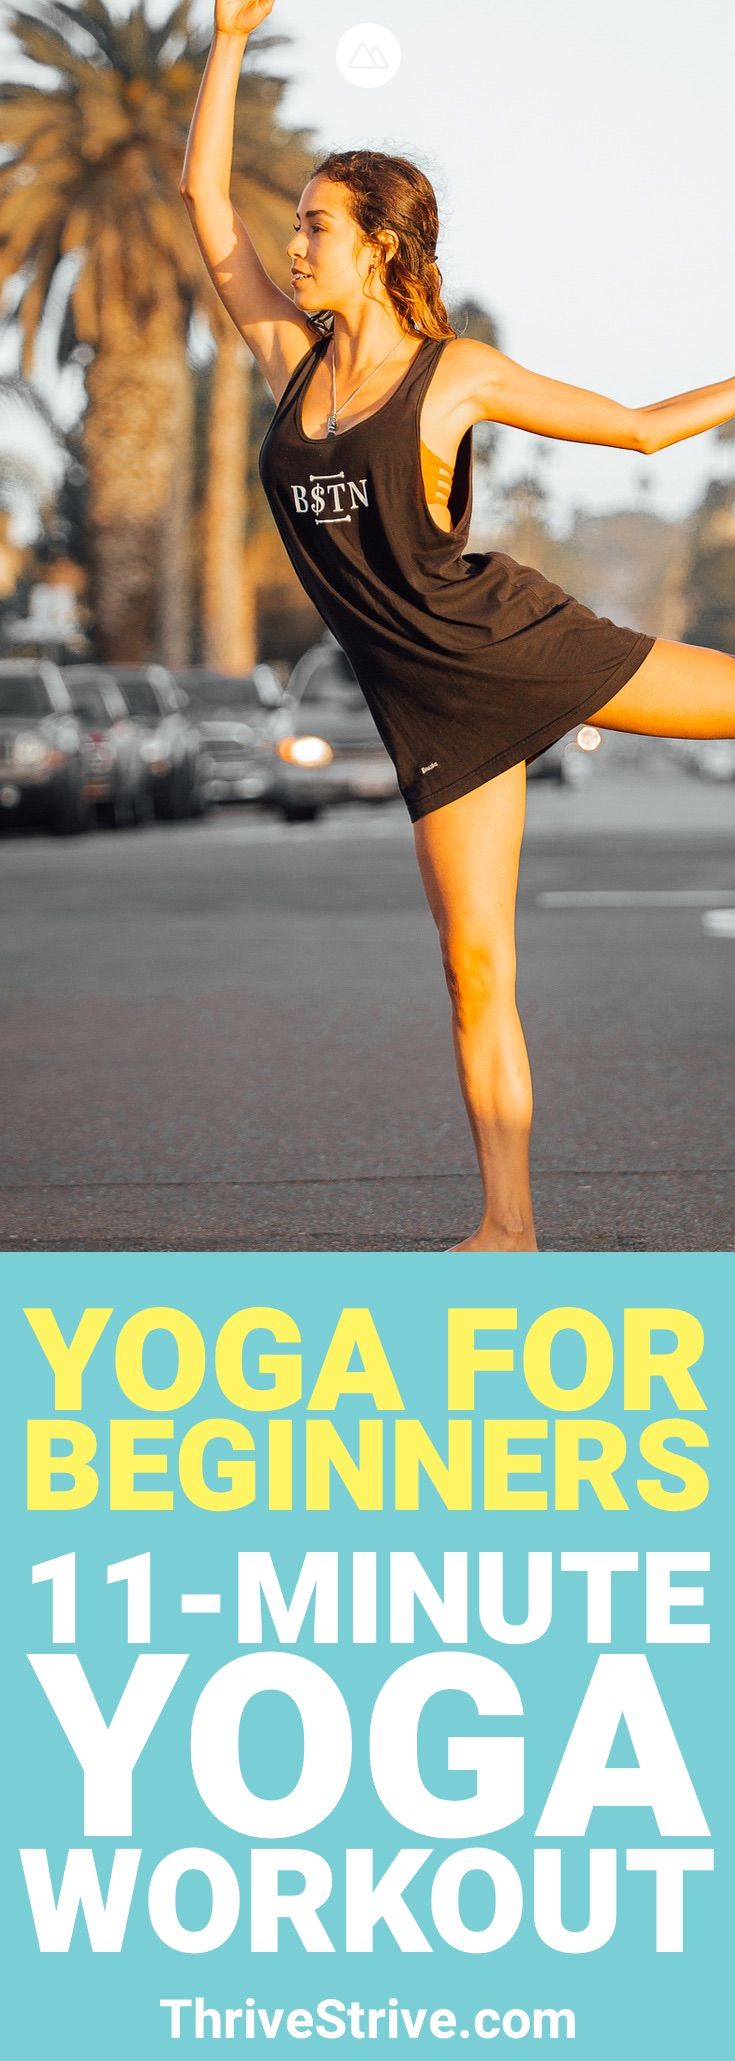 Ready to get started with Yoga? This yoga workout is great for any beginners. It...